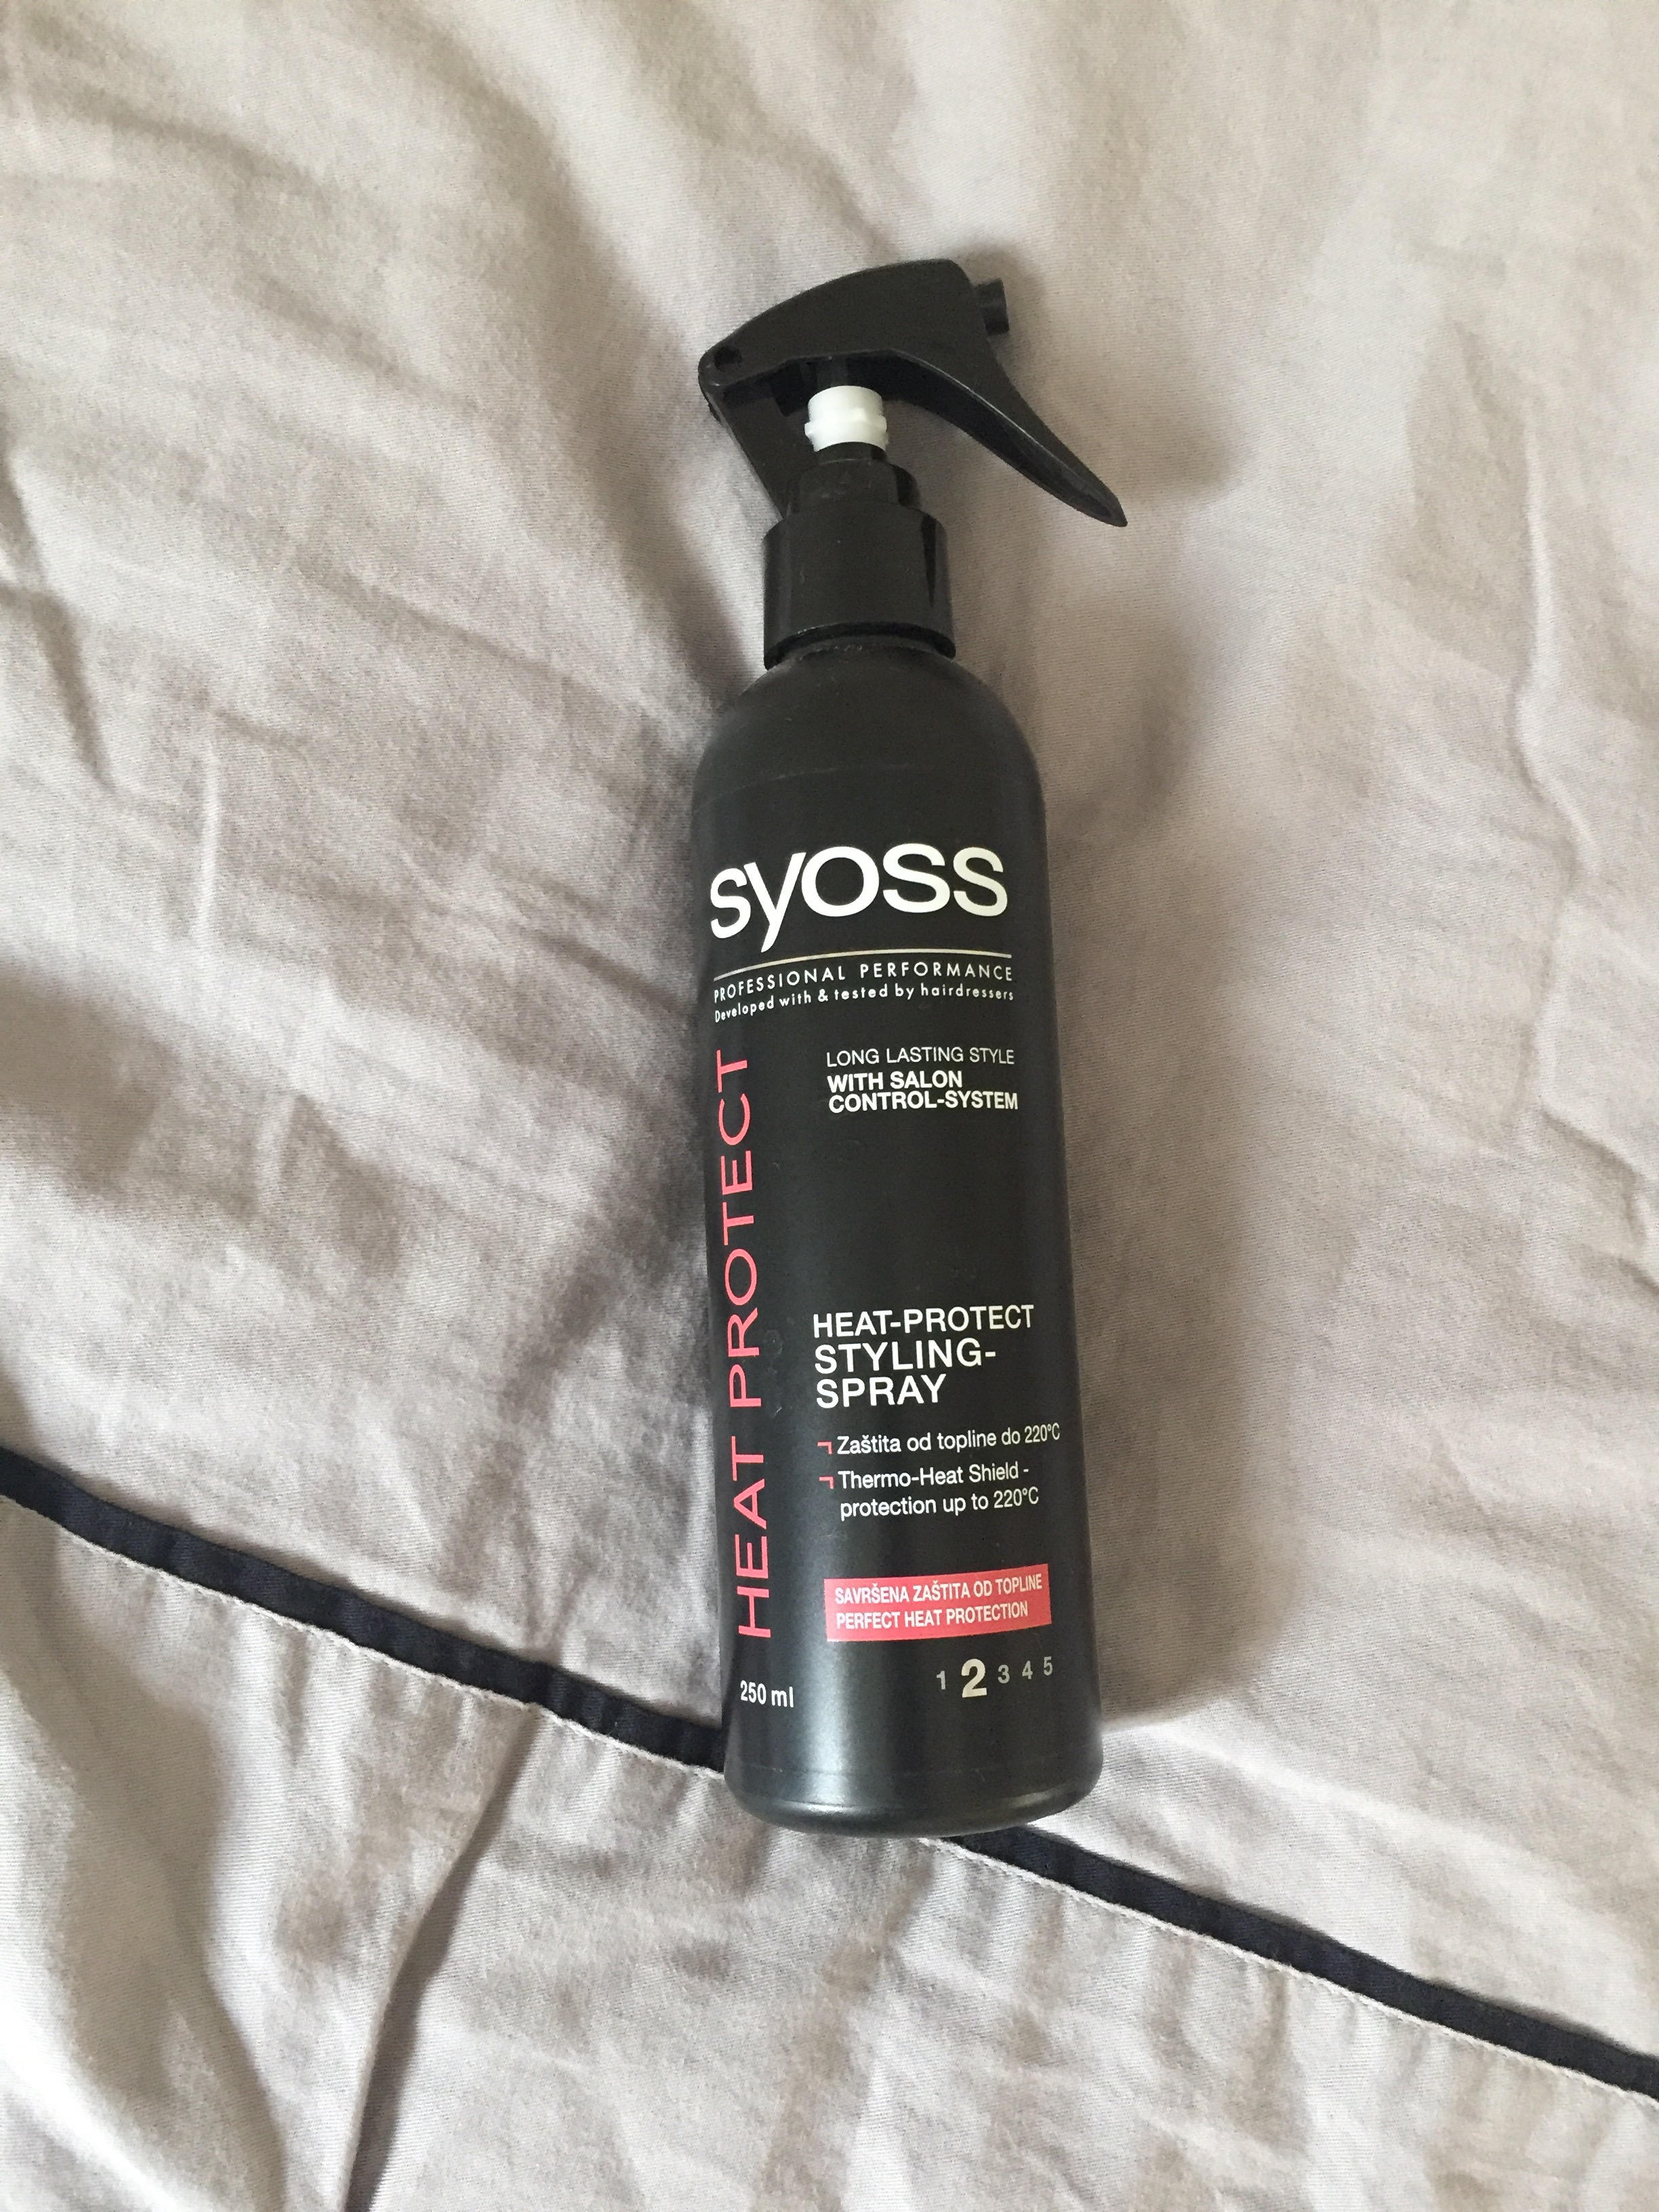 Beauty Find Syoss Heat Protect Styling Spray Love Hope Dream